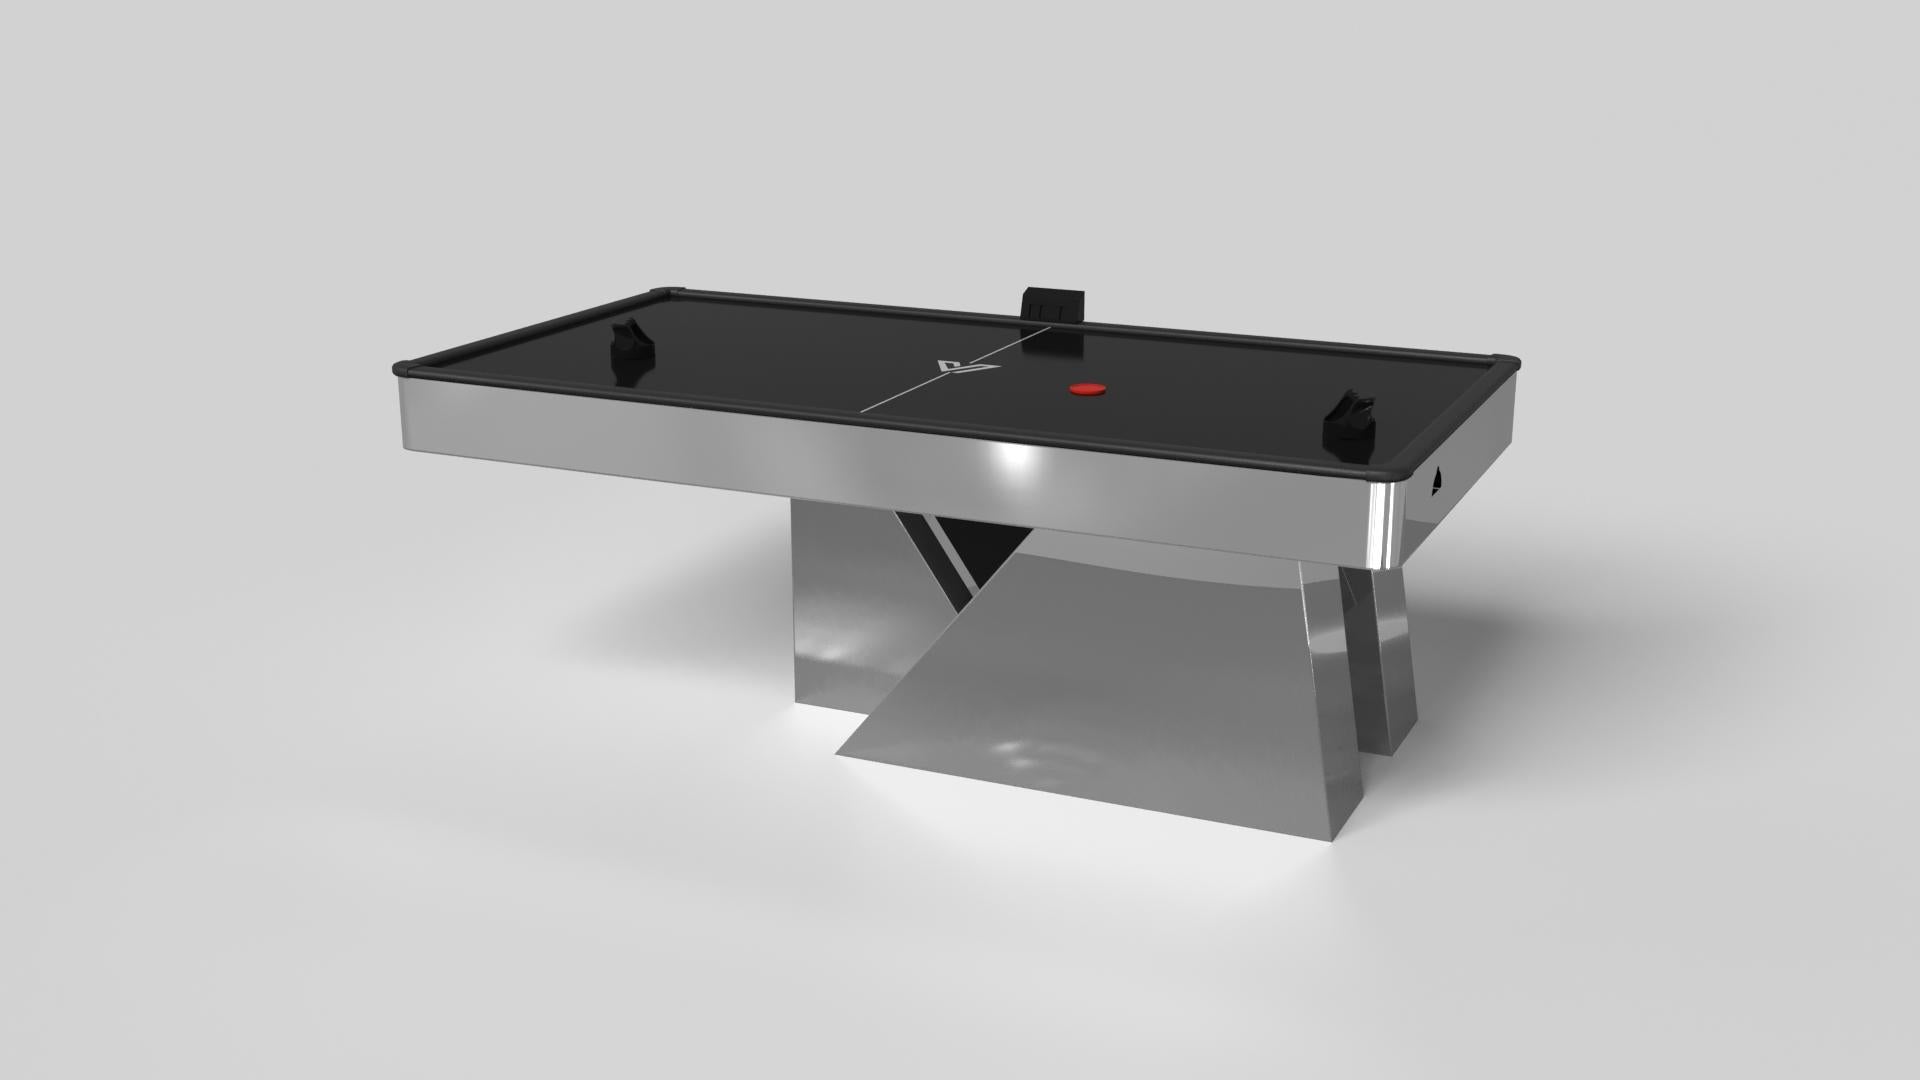 An asymmetric base creates a free-floating silhouette, making the Stilt air hockey table in chrome with walnut a compelling, contemporary addition to the modern home. Crafted from durable metal with solid walnut wood accents, this luxury handcrafted